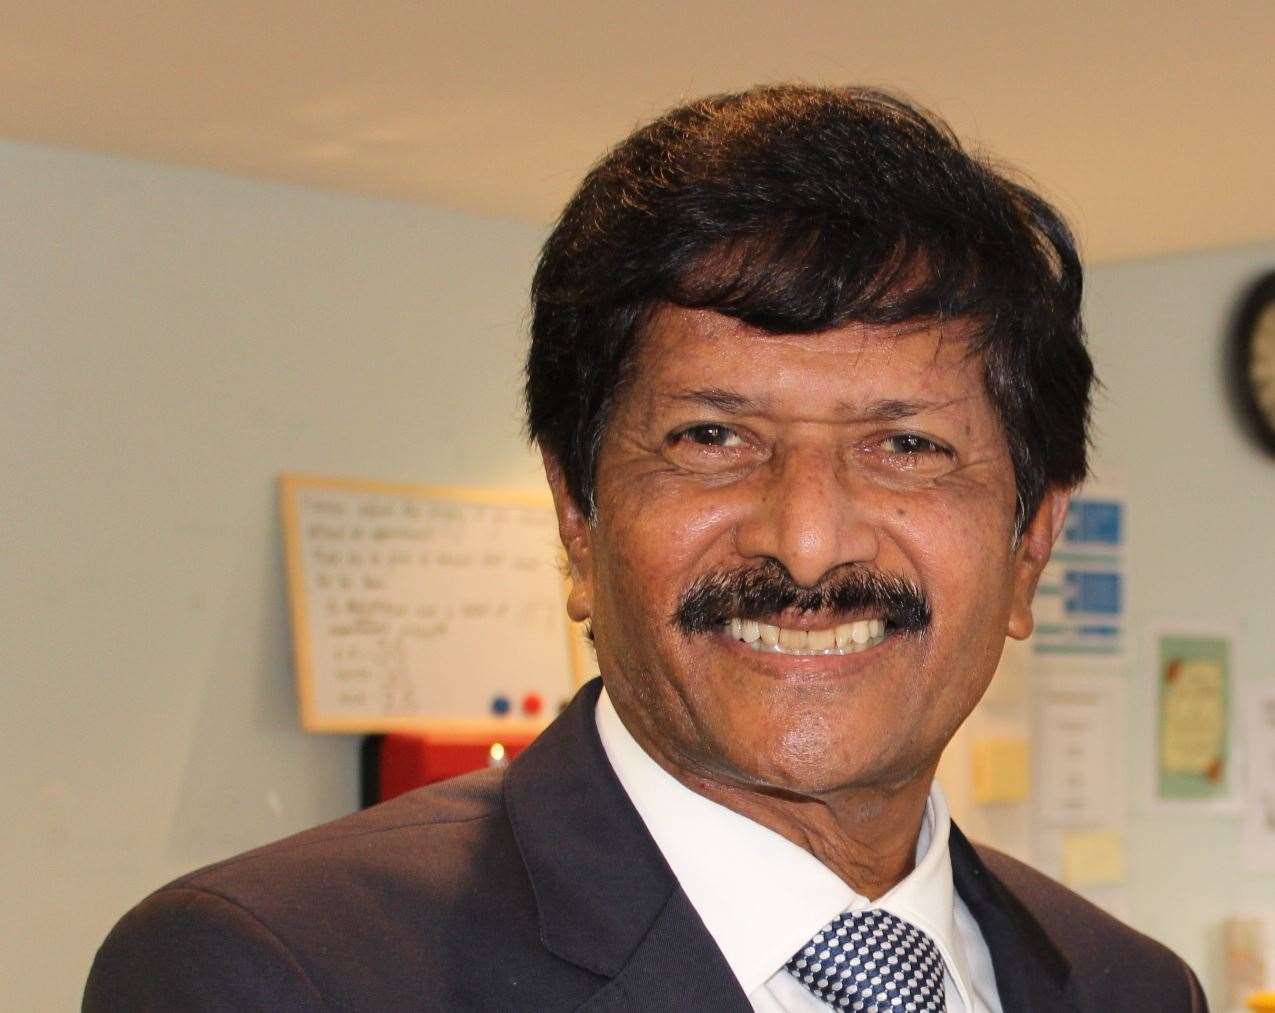 Dr Chandran announced before Christmas that he had retired